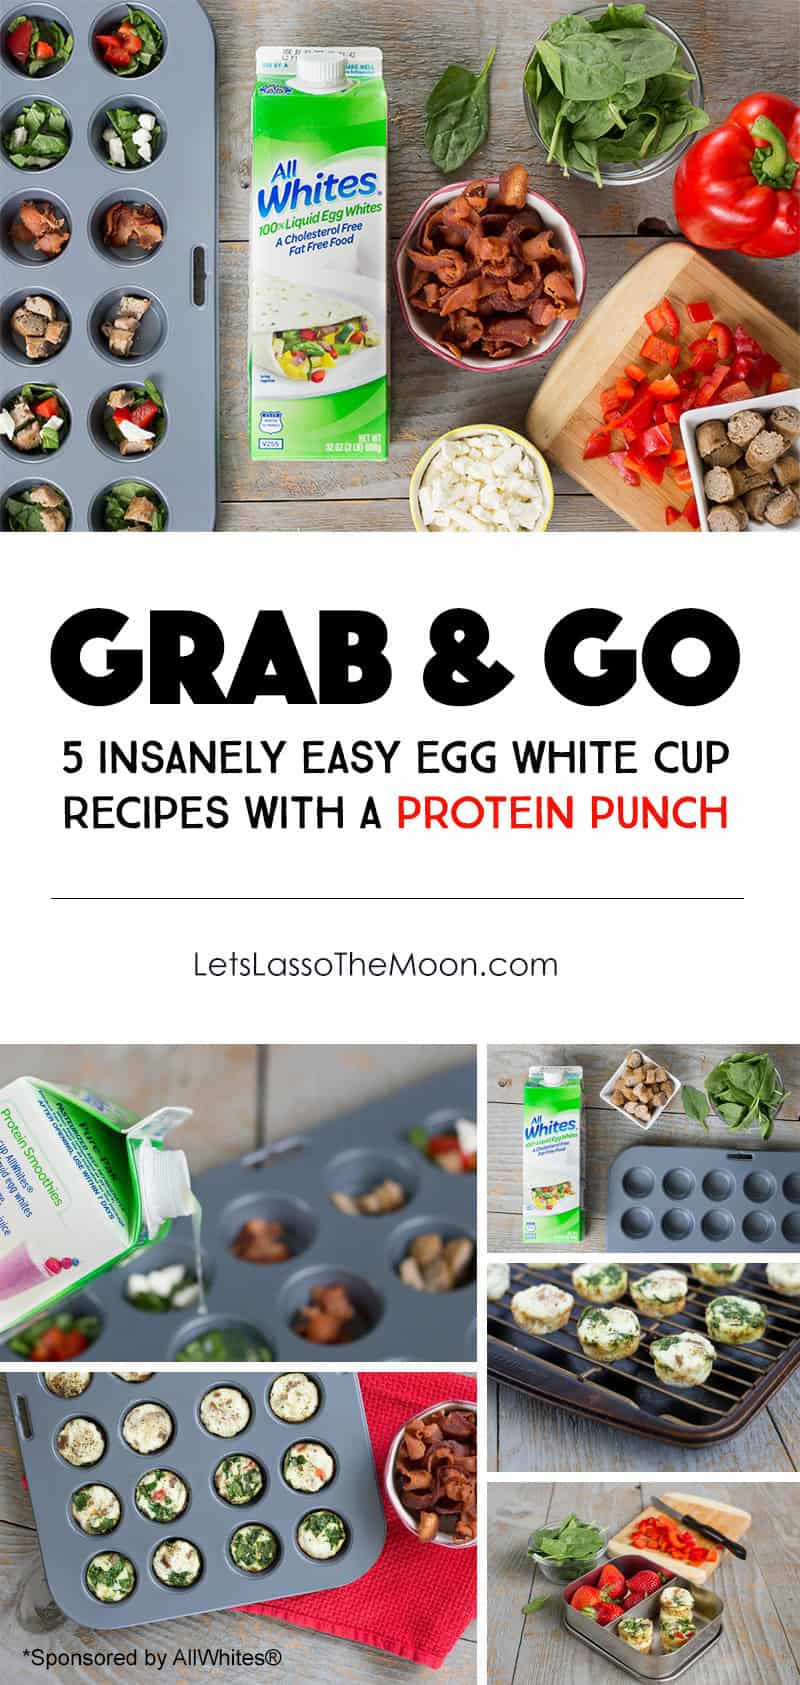 Here are 5 insanely easy breakfast recipes that will give you a morning boost. These healthy egg white cups are packed full of protein and is a quick on-the-go breakfast snack. You can make one batch to last a full week. *Crazy easy way to start your family's day with eggs